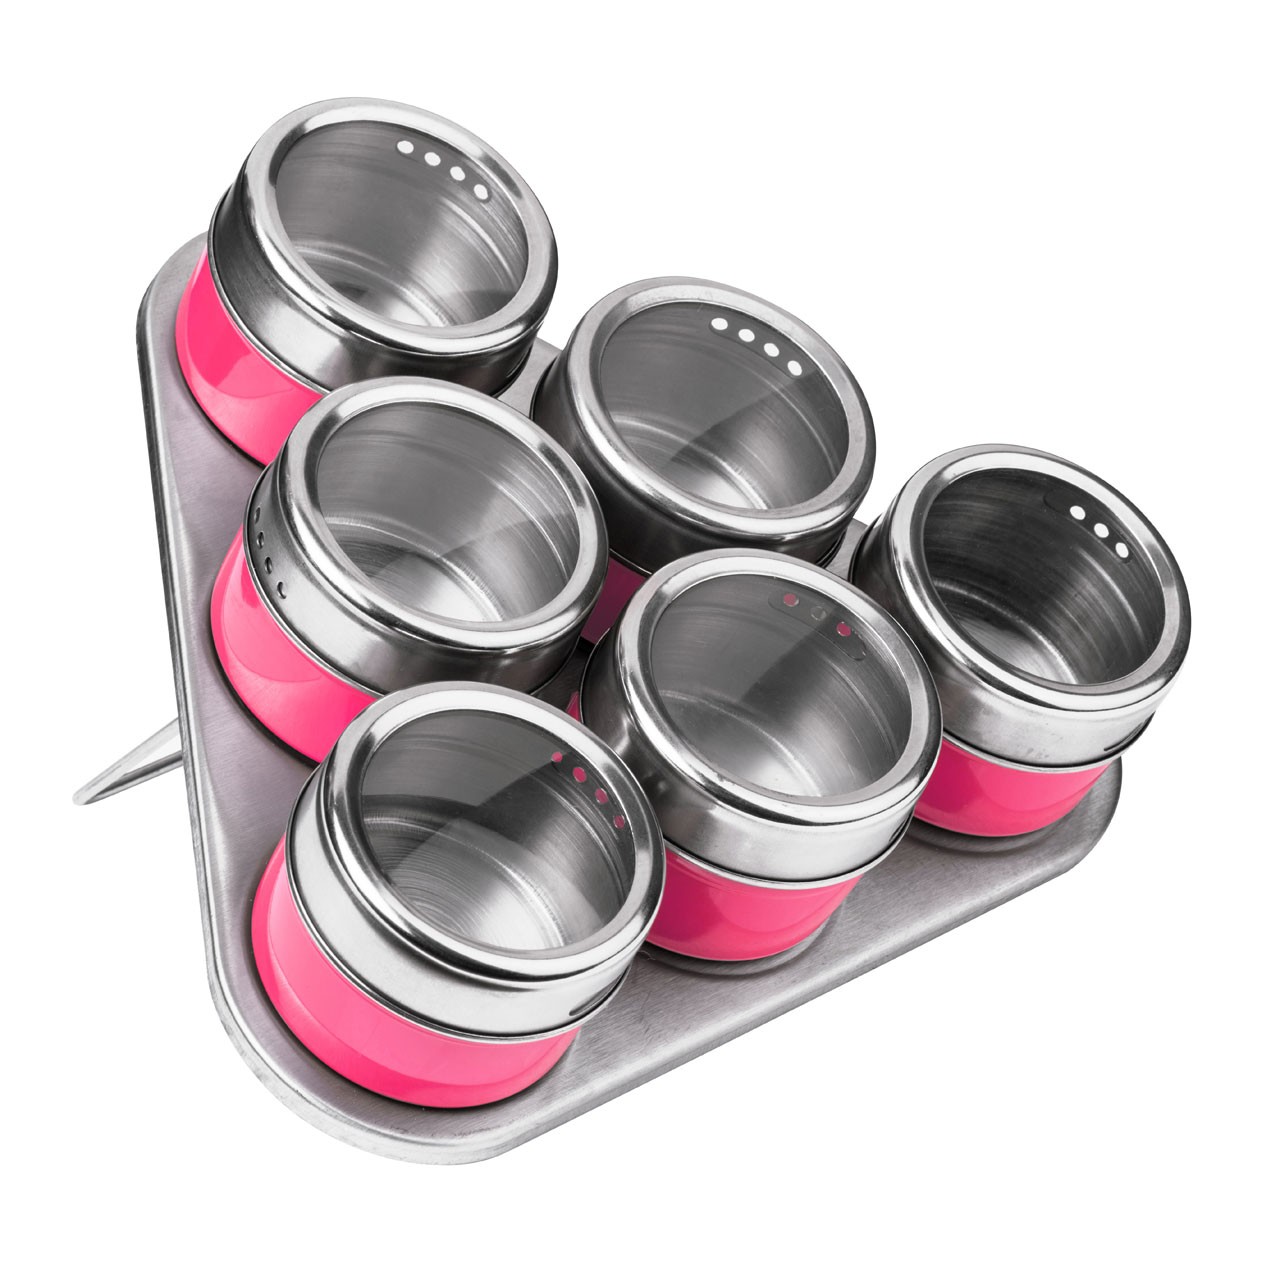 Magnetic Tray with 6 Spice Jars - Hot Pink